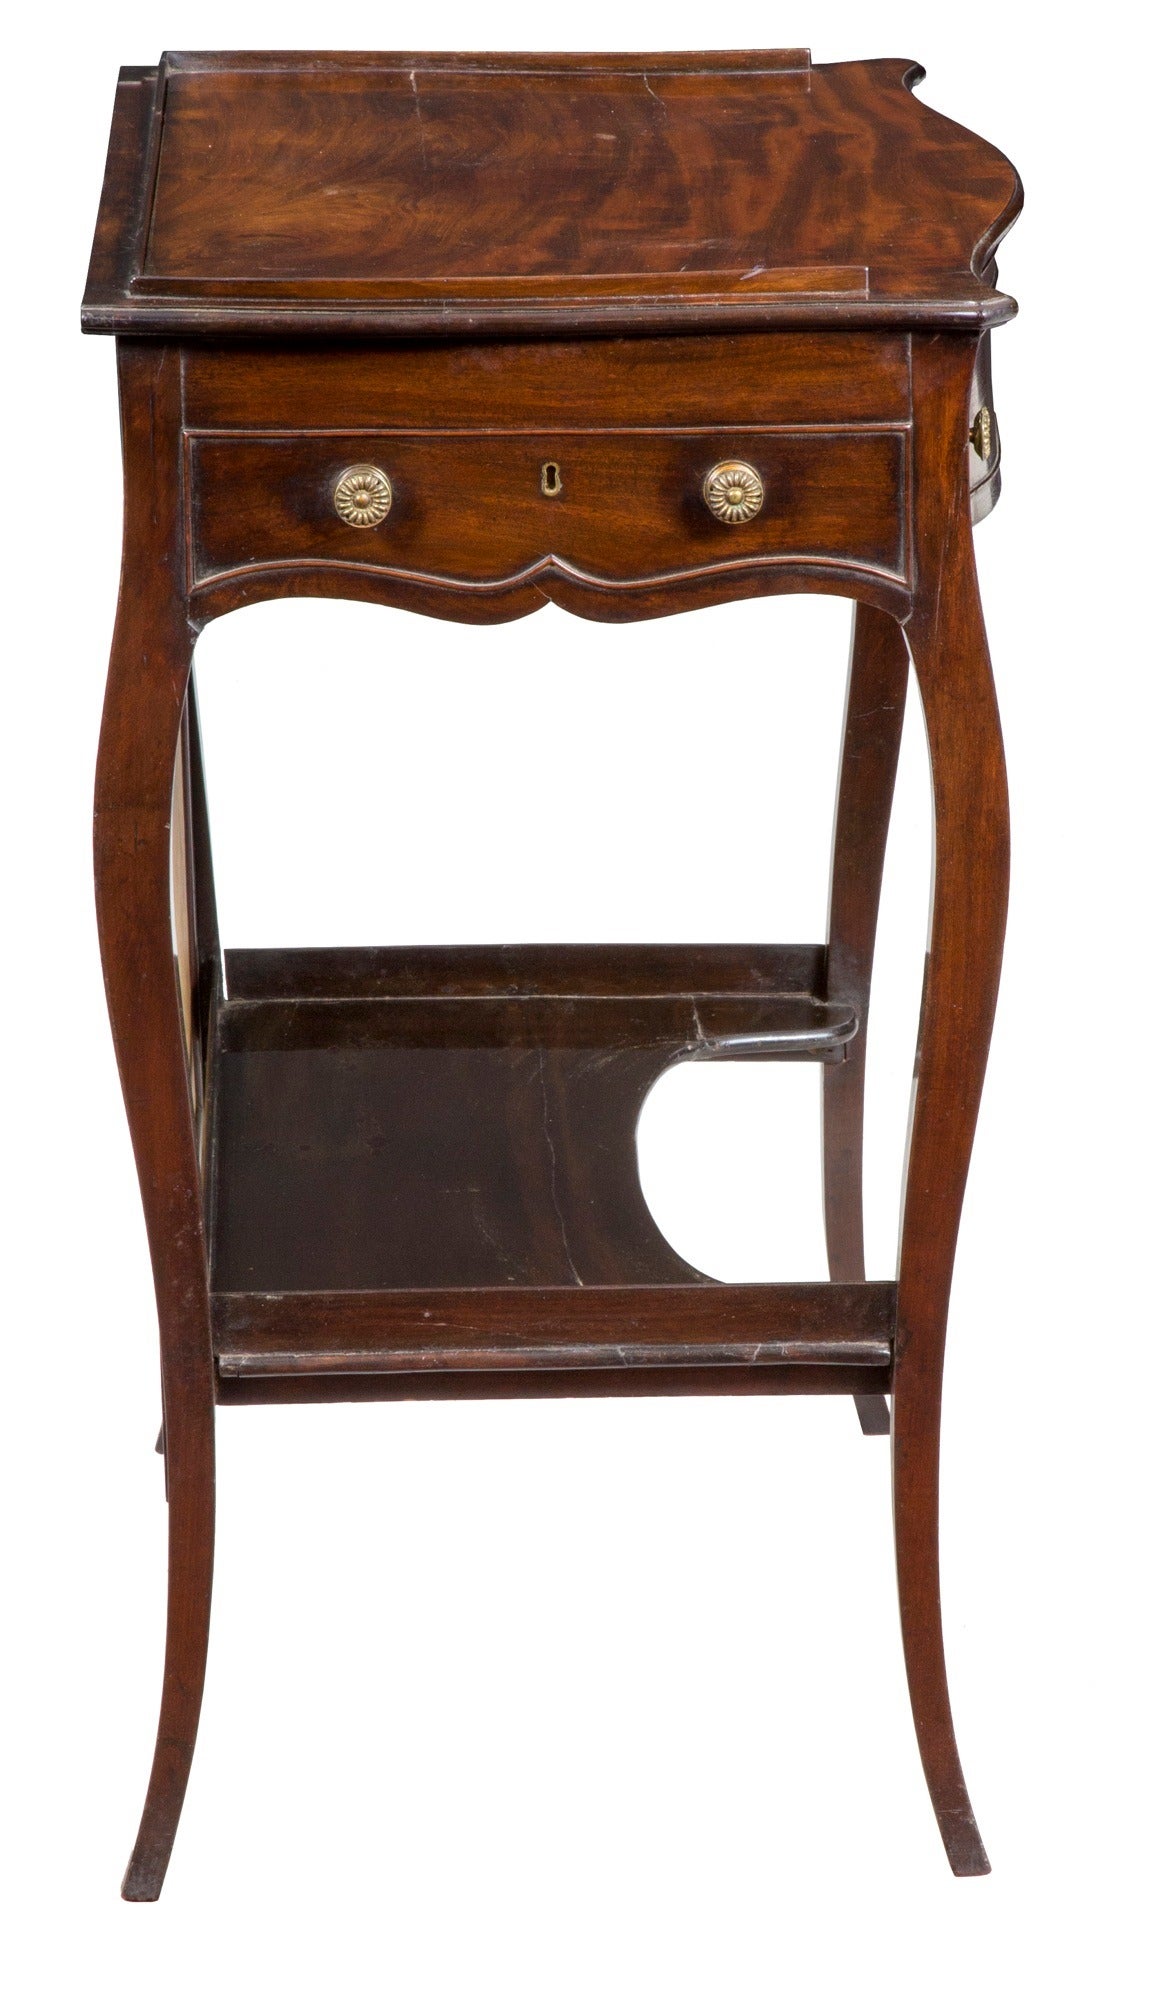 For a small compact piece, there’s a lot going on and of the finest quality, notably workmanship, style and choice of wood. At this point, there was a notable French influence in England and pieces of this type were being produced. This ladies